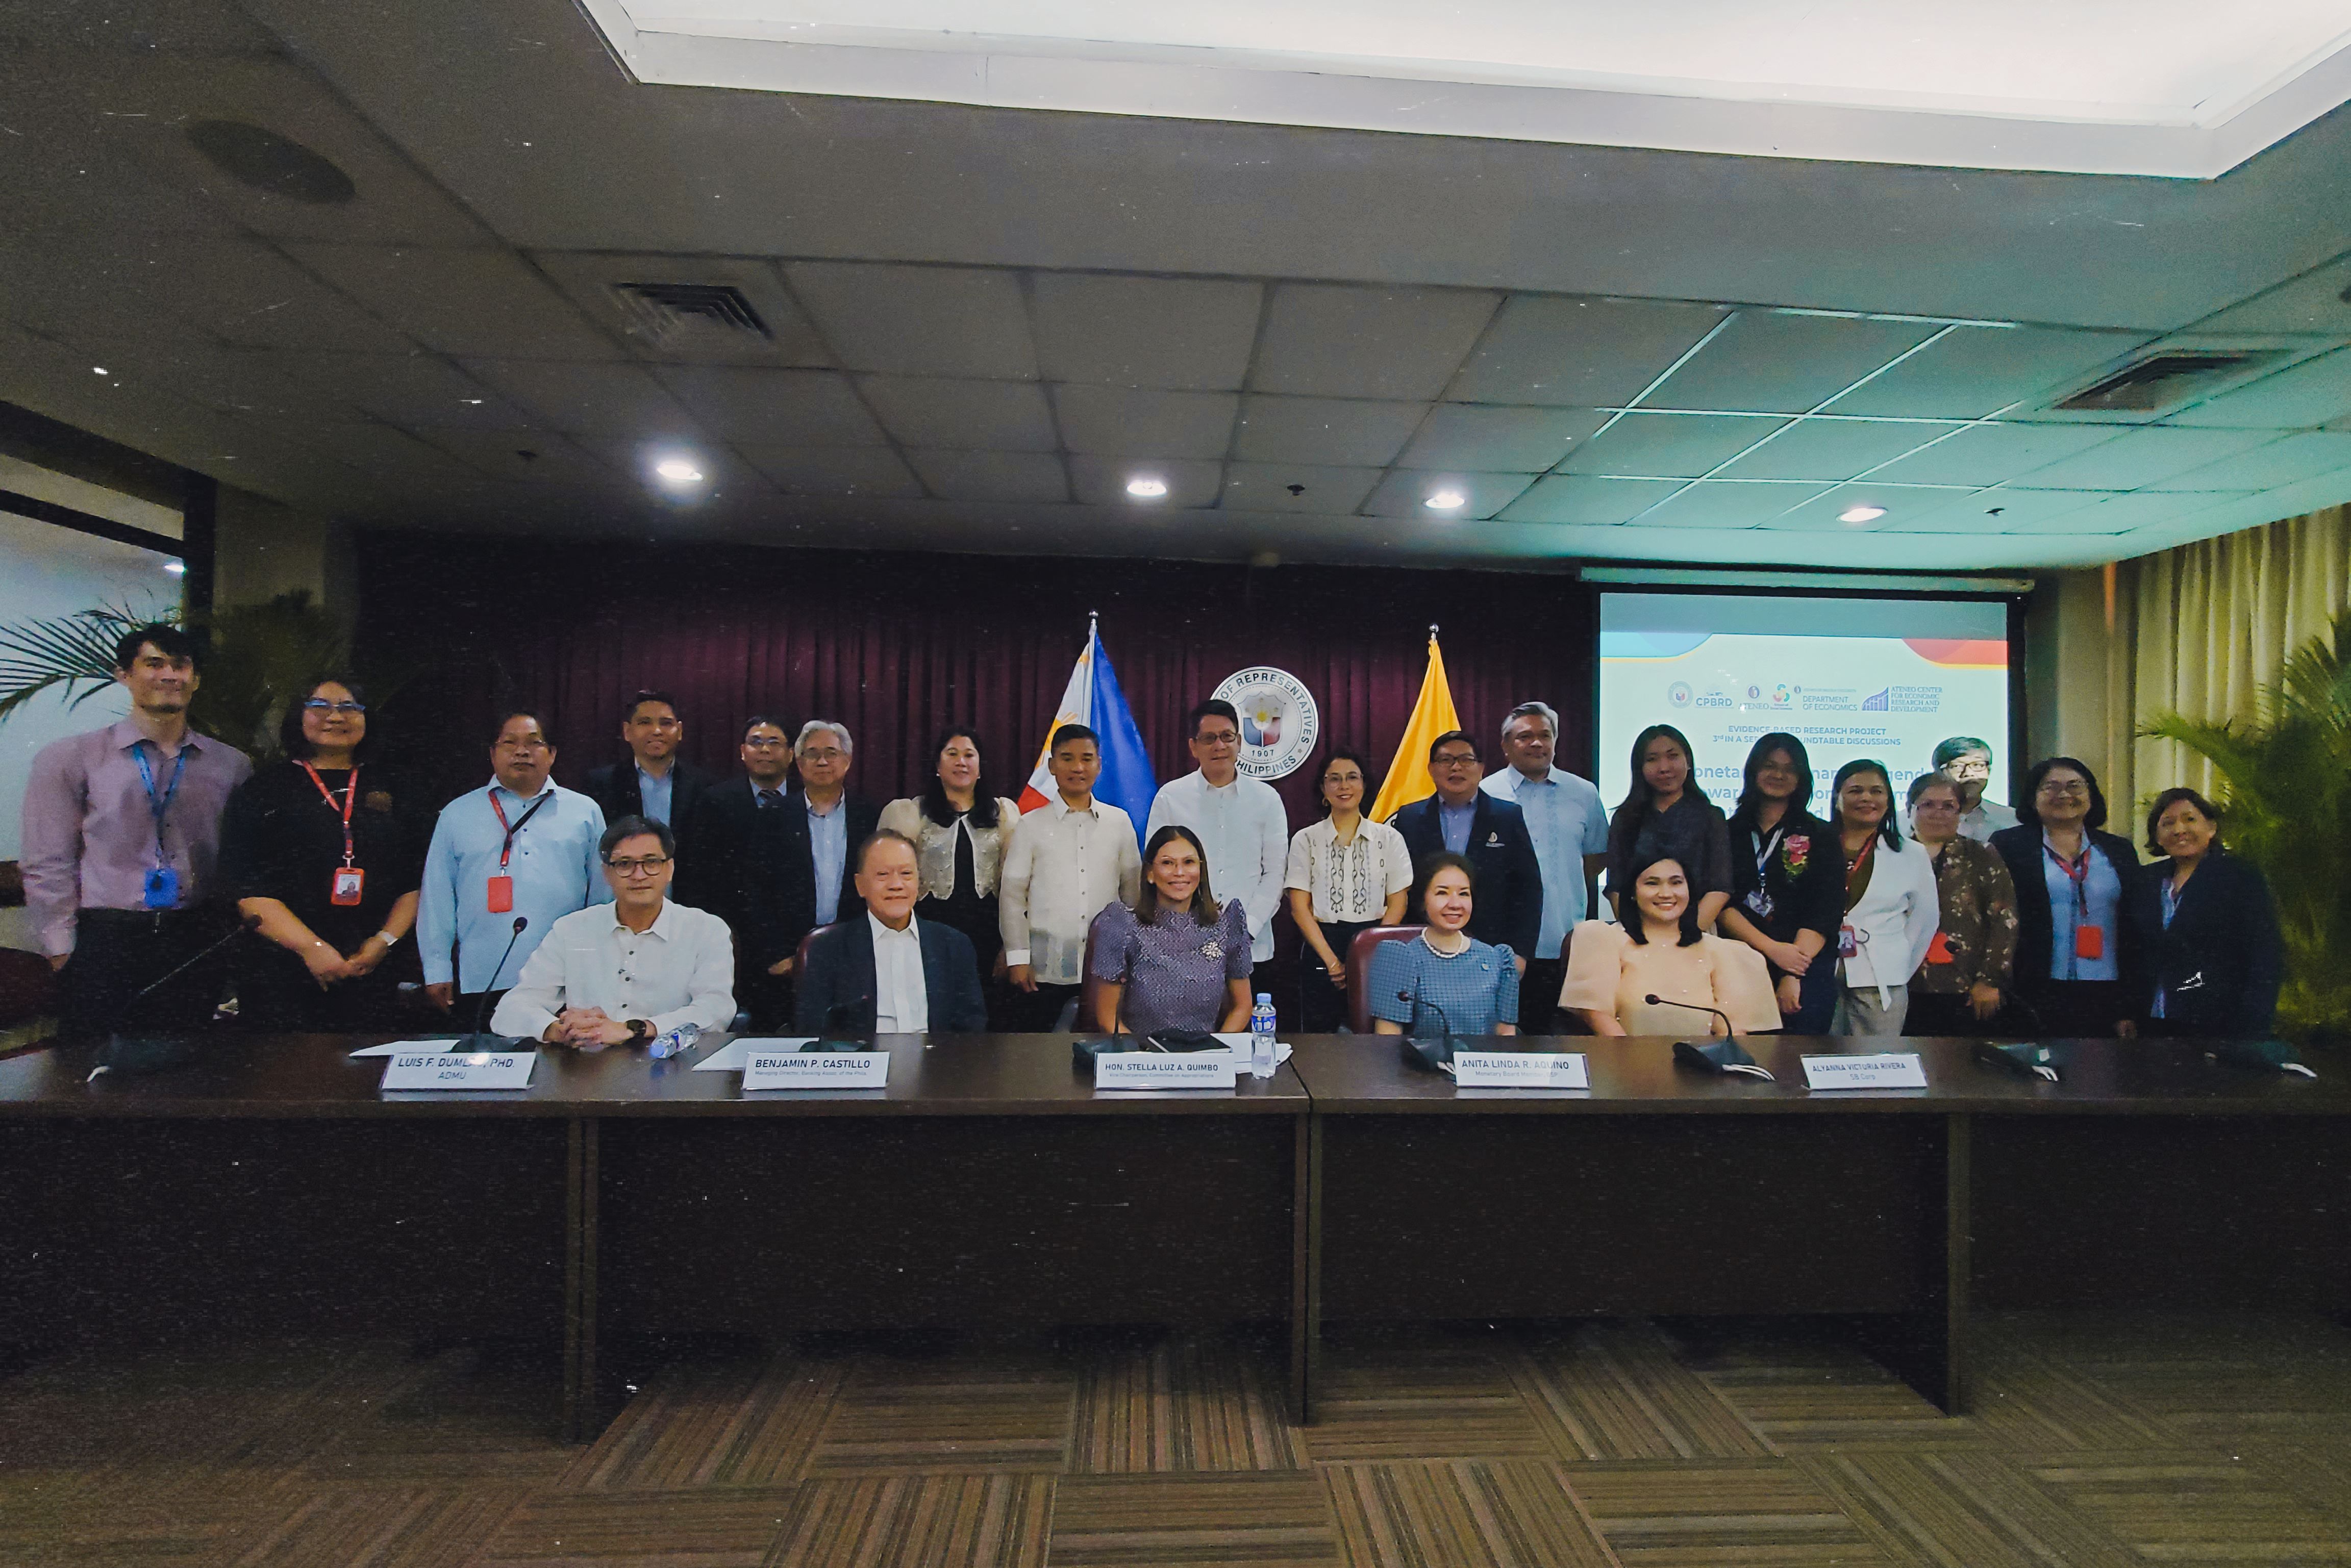 Rep. Stella Luz Quimbo, Rep. Rachel Marguerite Del Mar, Rep. Roman Romulo the Panelists,   ADMU-HRep Monetary Research Team, CPBRD, Staff, and and the rest of HREP-ADMU Congressional Research Fellows 